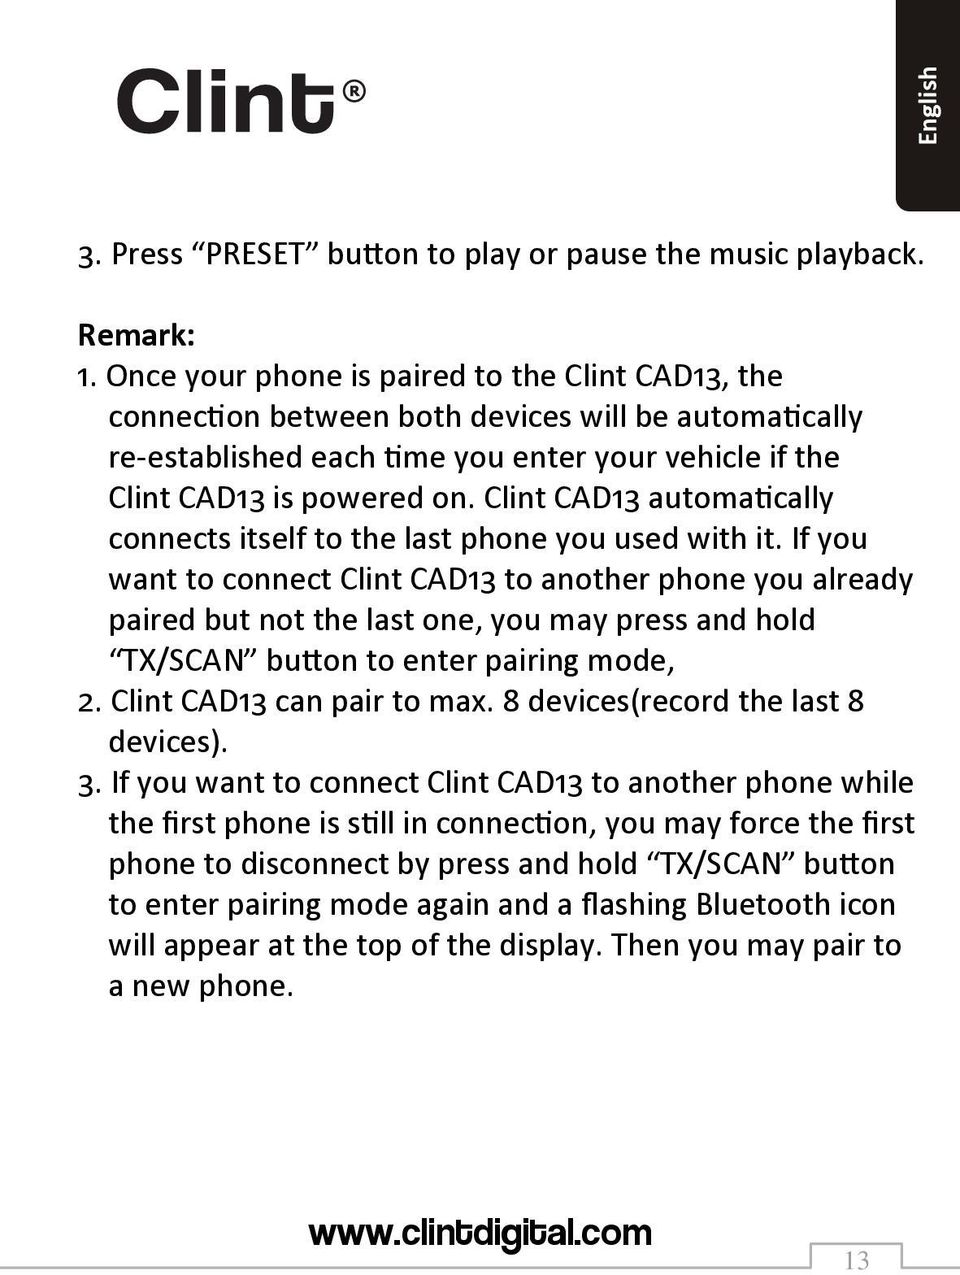 Clint CAD13 automatically connects itself to the last phone you used with it.